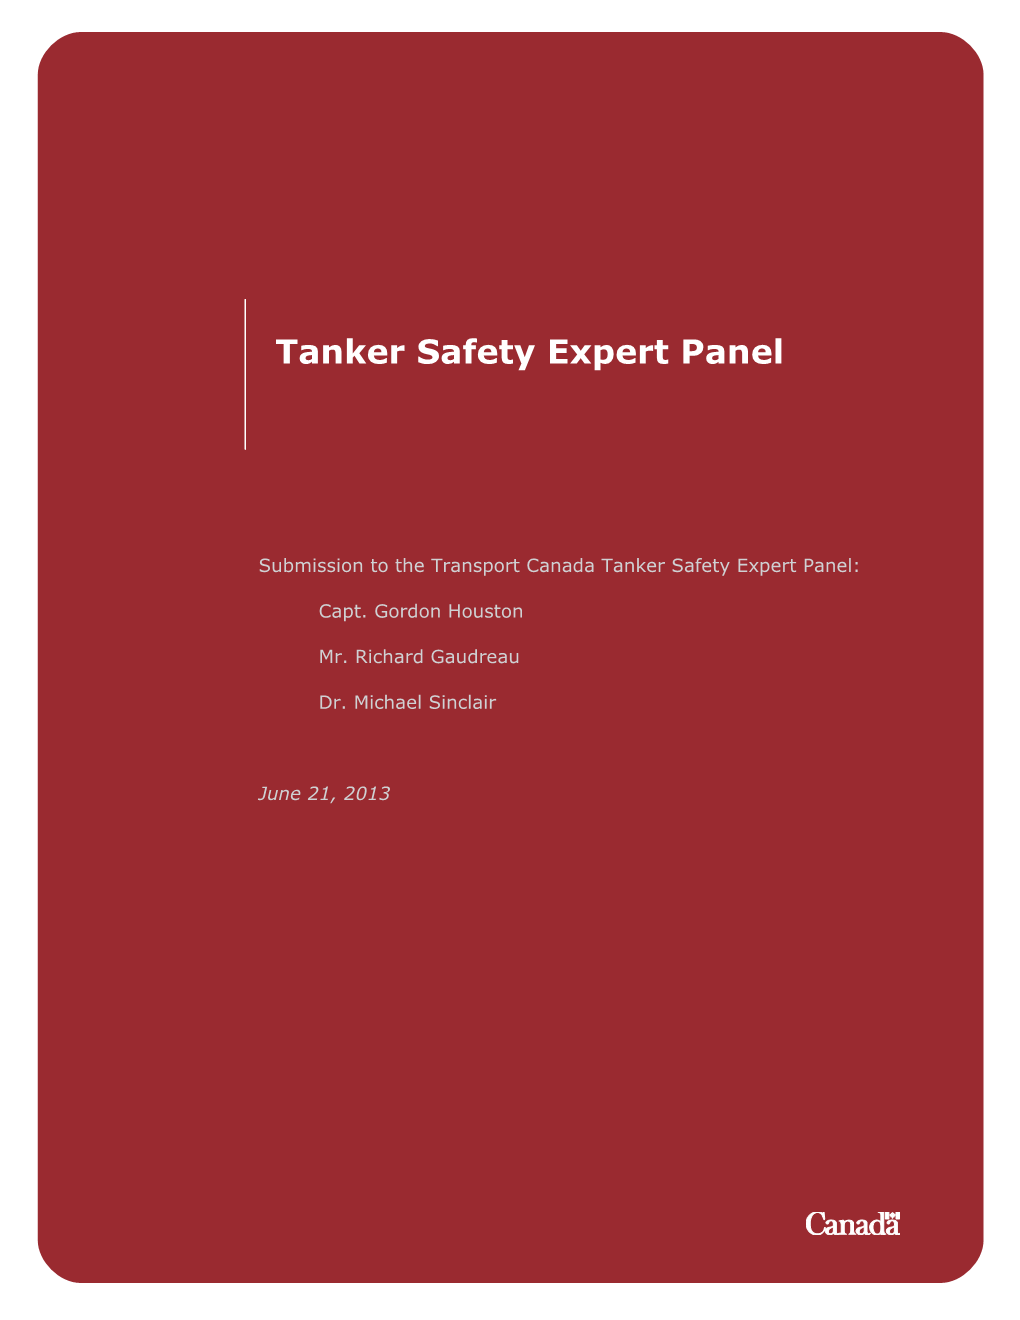 PORT METRO VANCOUVER Submission to Canada S Tanker Safety Expert Panel